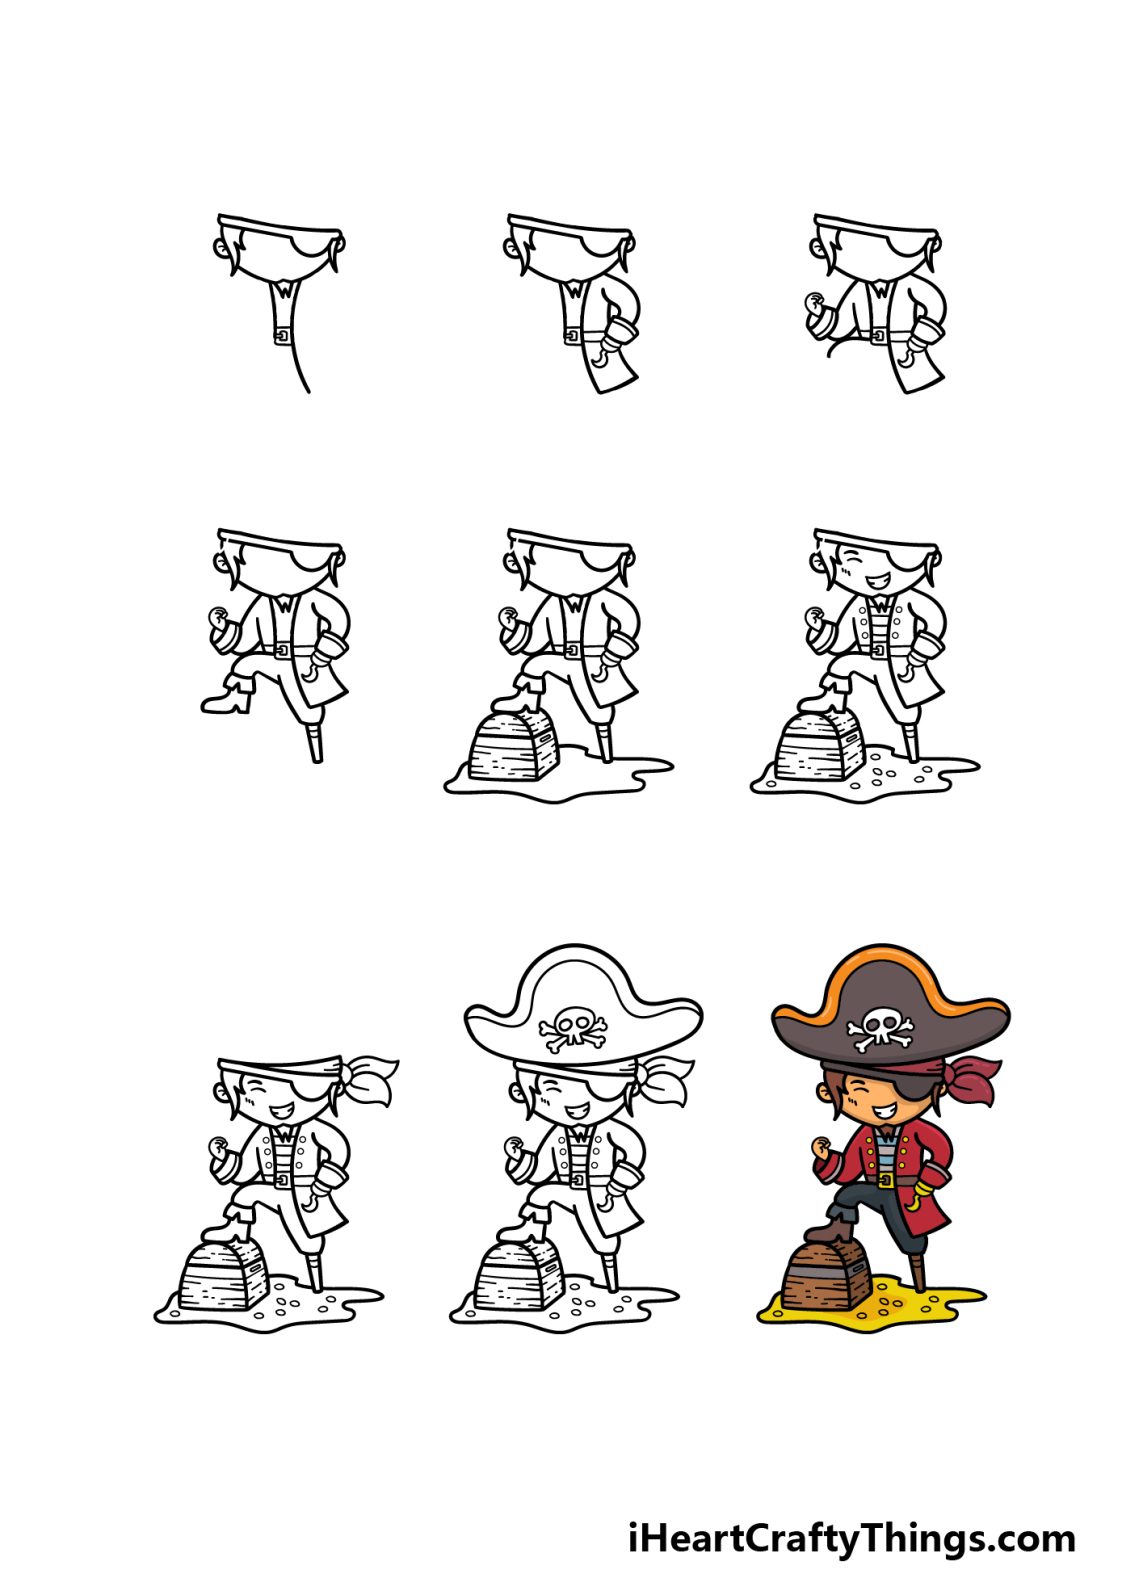 Cartoon Pirate Drawing How To Draw A Cartoon Pirate Step By Step